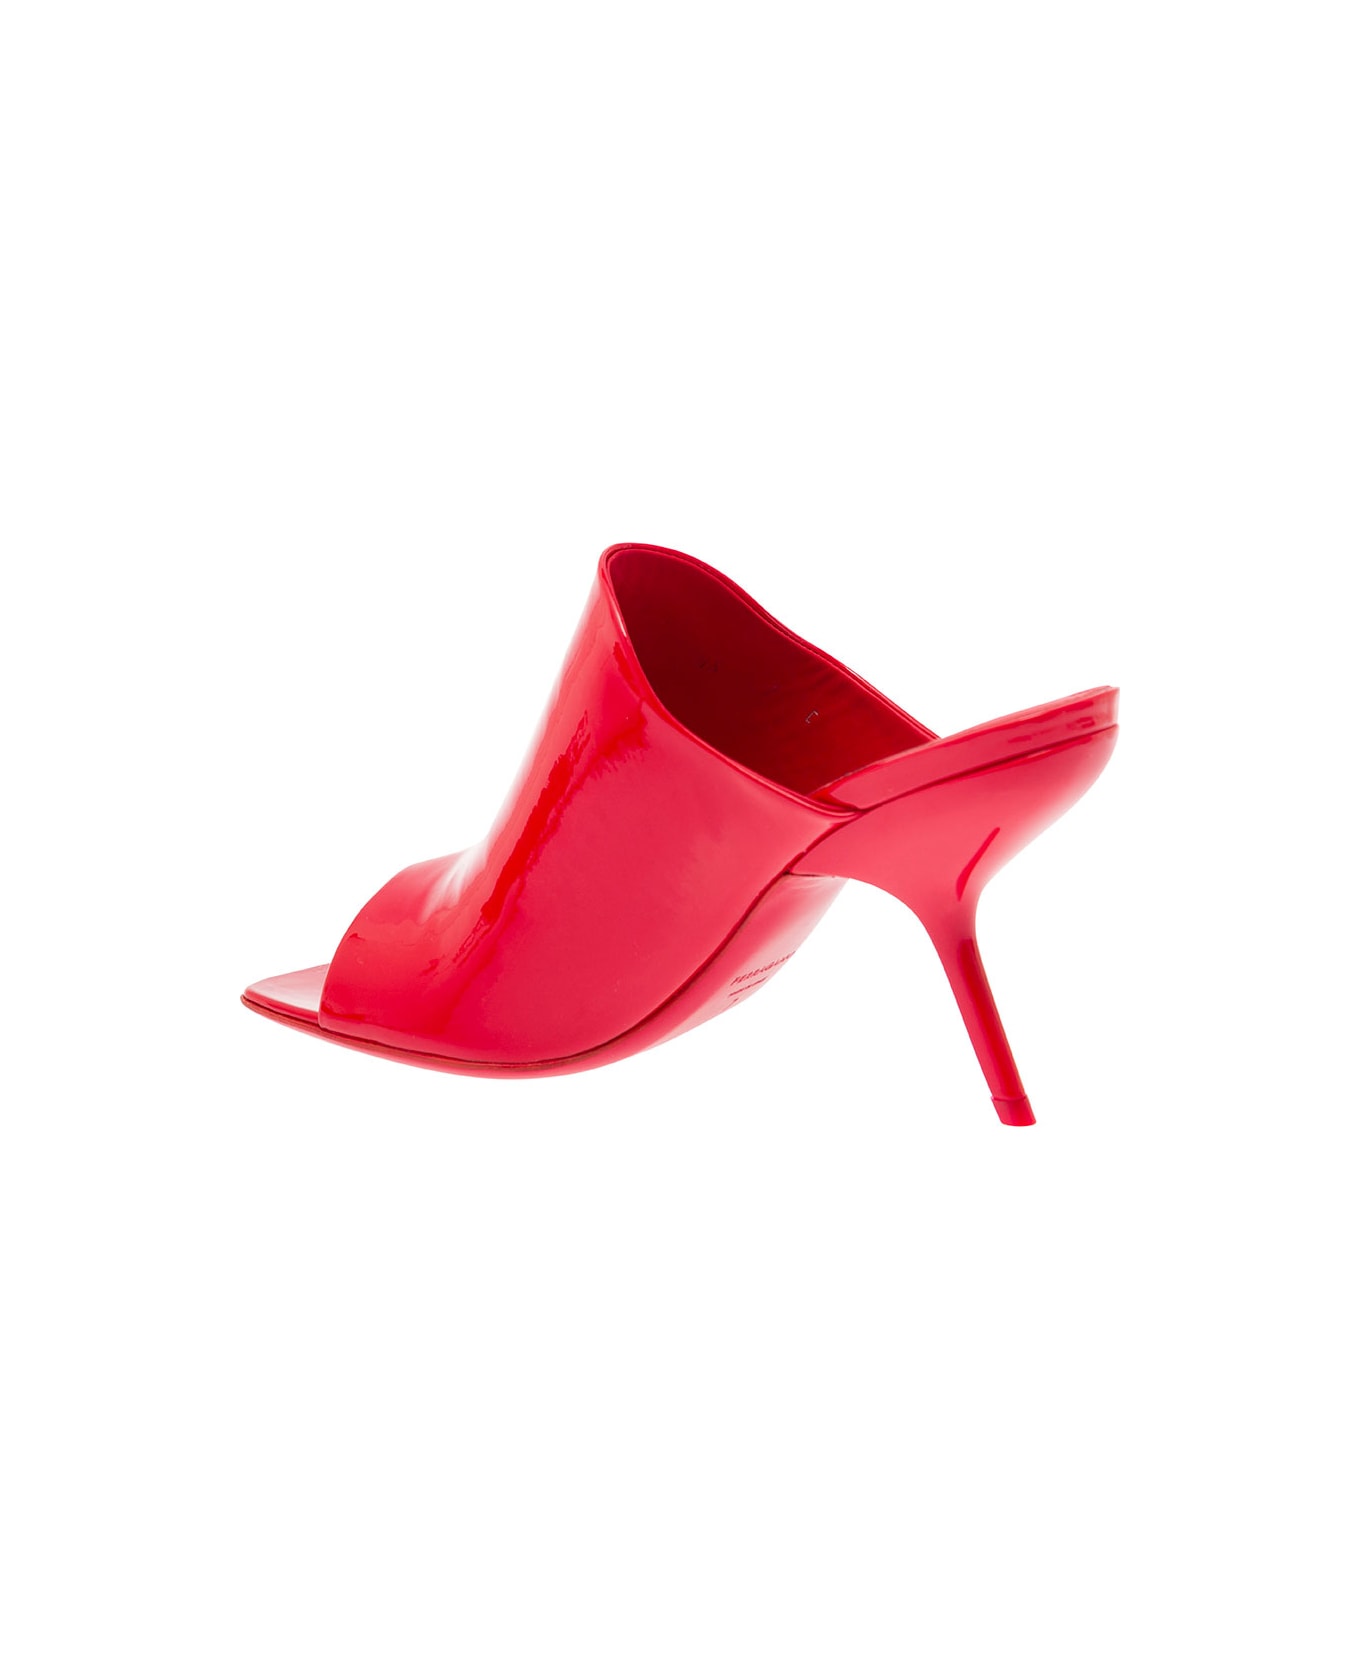 Ferragamo 'open Toe' Red Slide With Slanted, Contoured Heel In Patent Leather Woman - RED サンダル